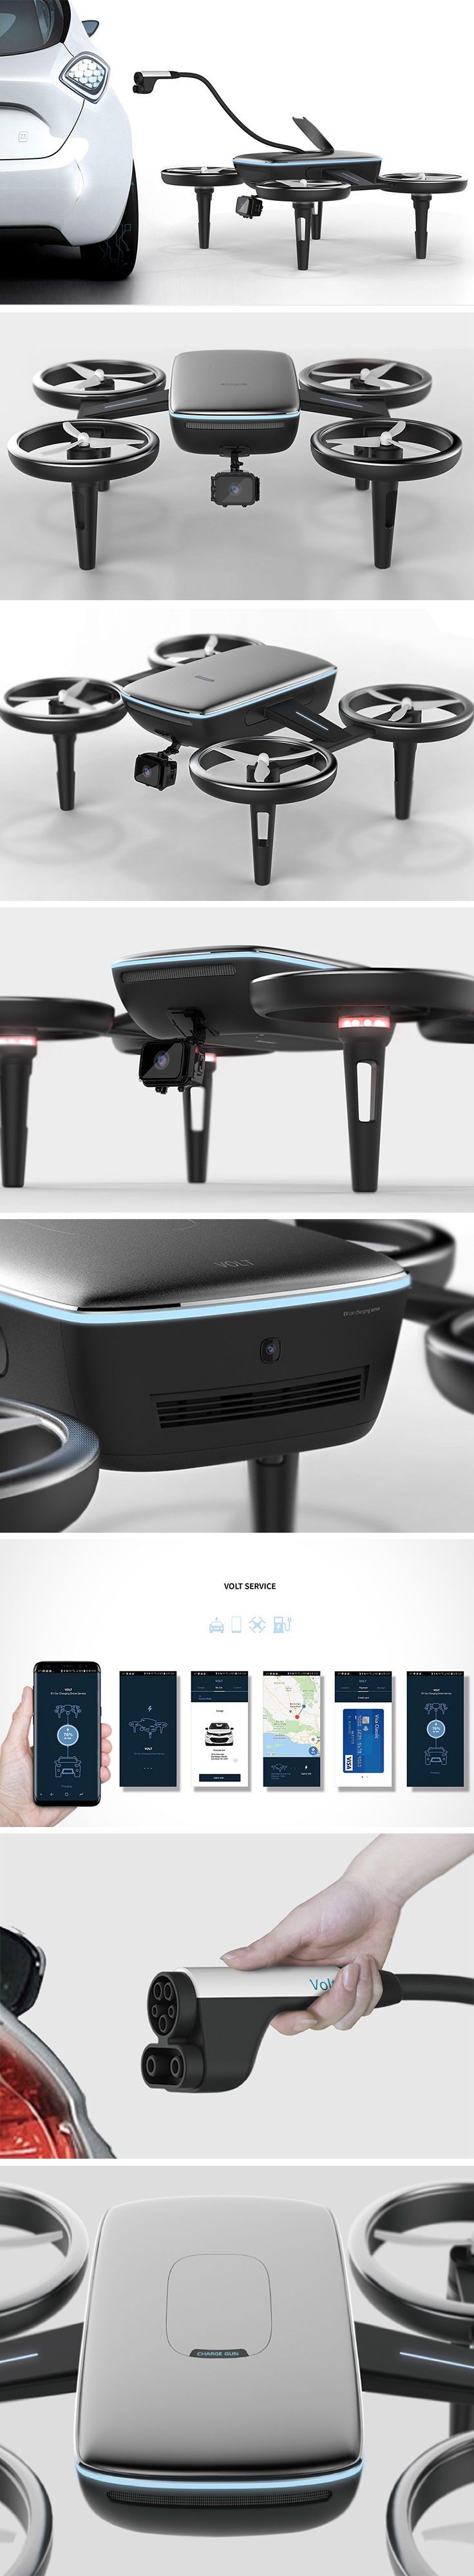 The Volt drone design takes portable charging to the next level. In fact, I can...